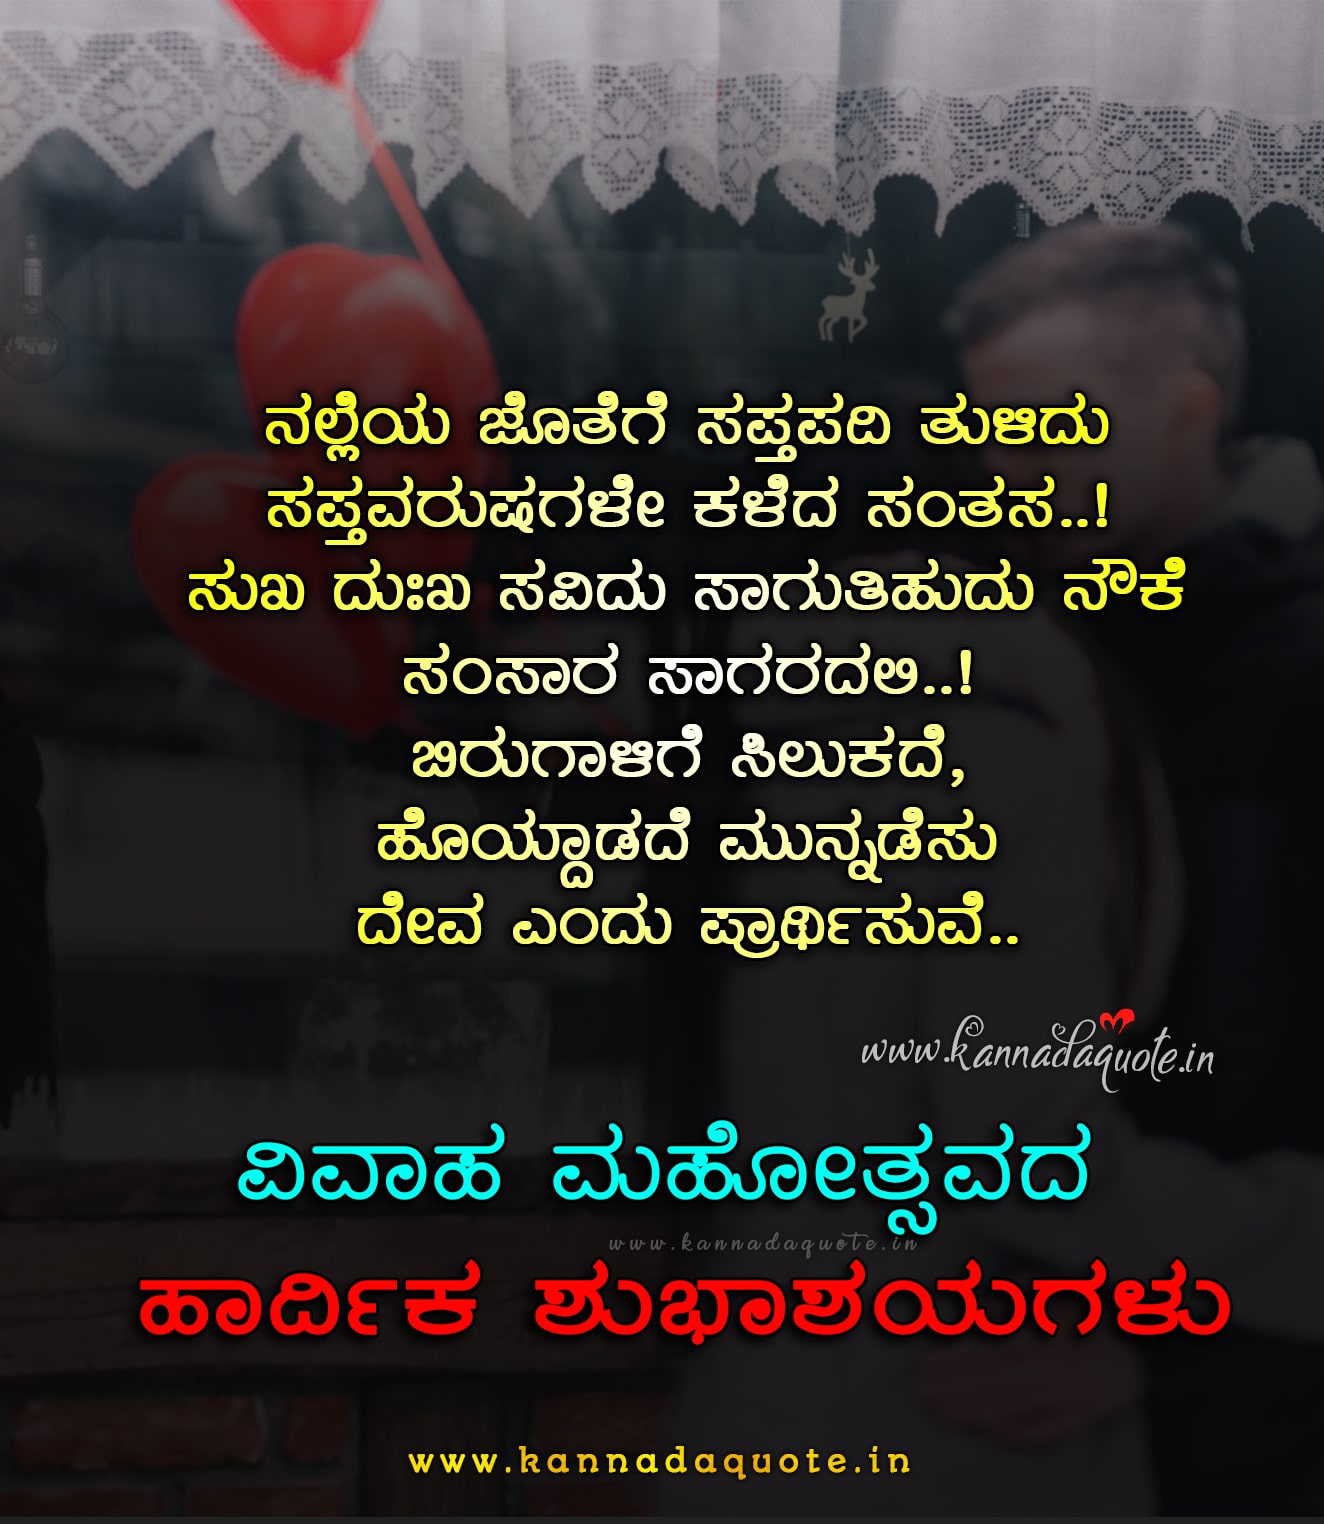 Wedding Anniversary Wishes in Kannada Quotes